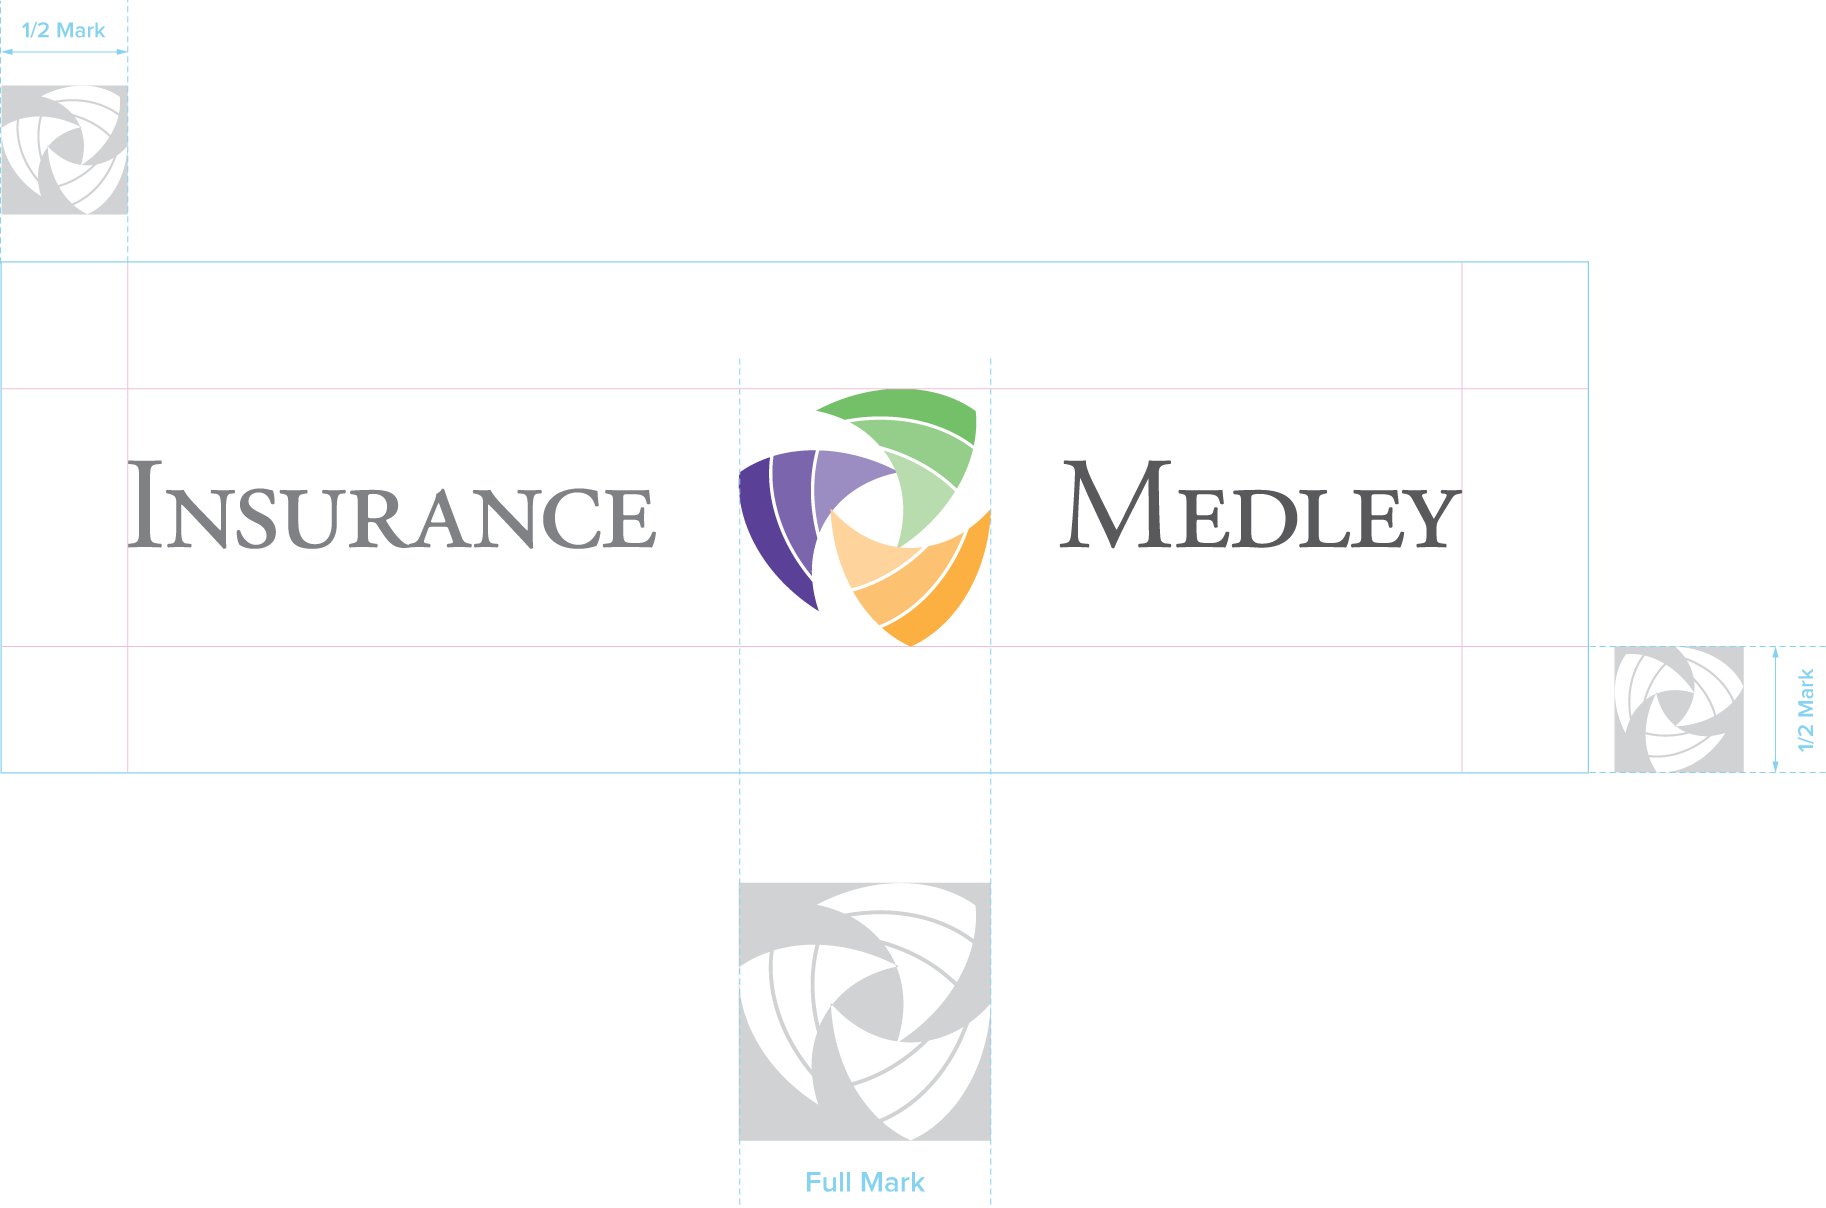 Insurance Medley Logo Clear space